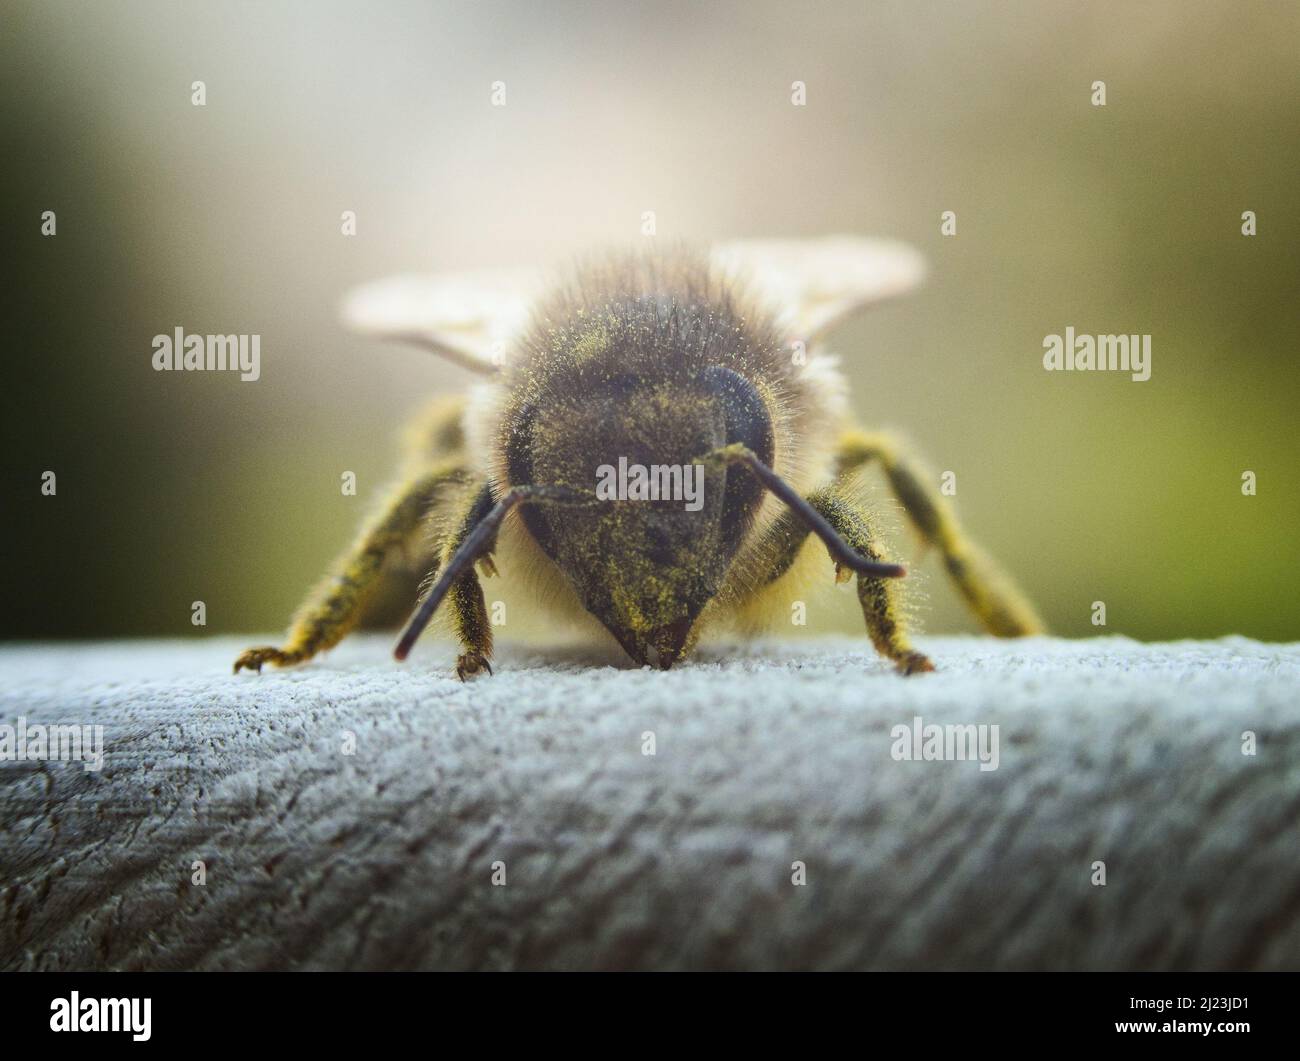 Macro photograph of early spring western honey bee (Apis mellifera) worker resting on a wooden gate, covered in pollen, possibly from a dandelion. UK. Stock Photo